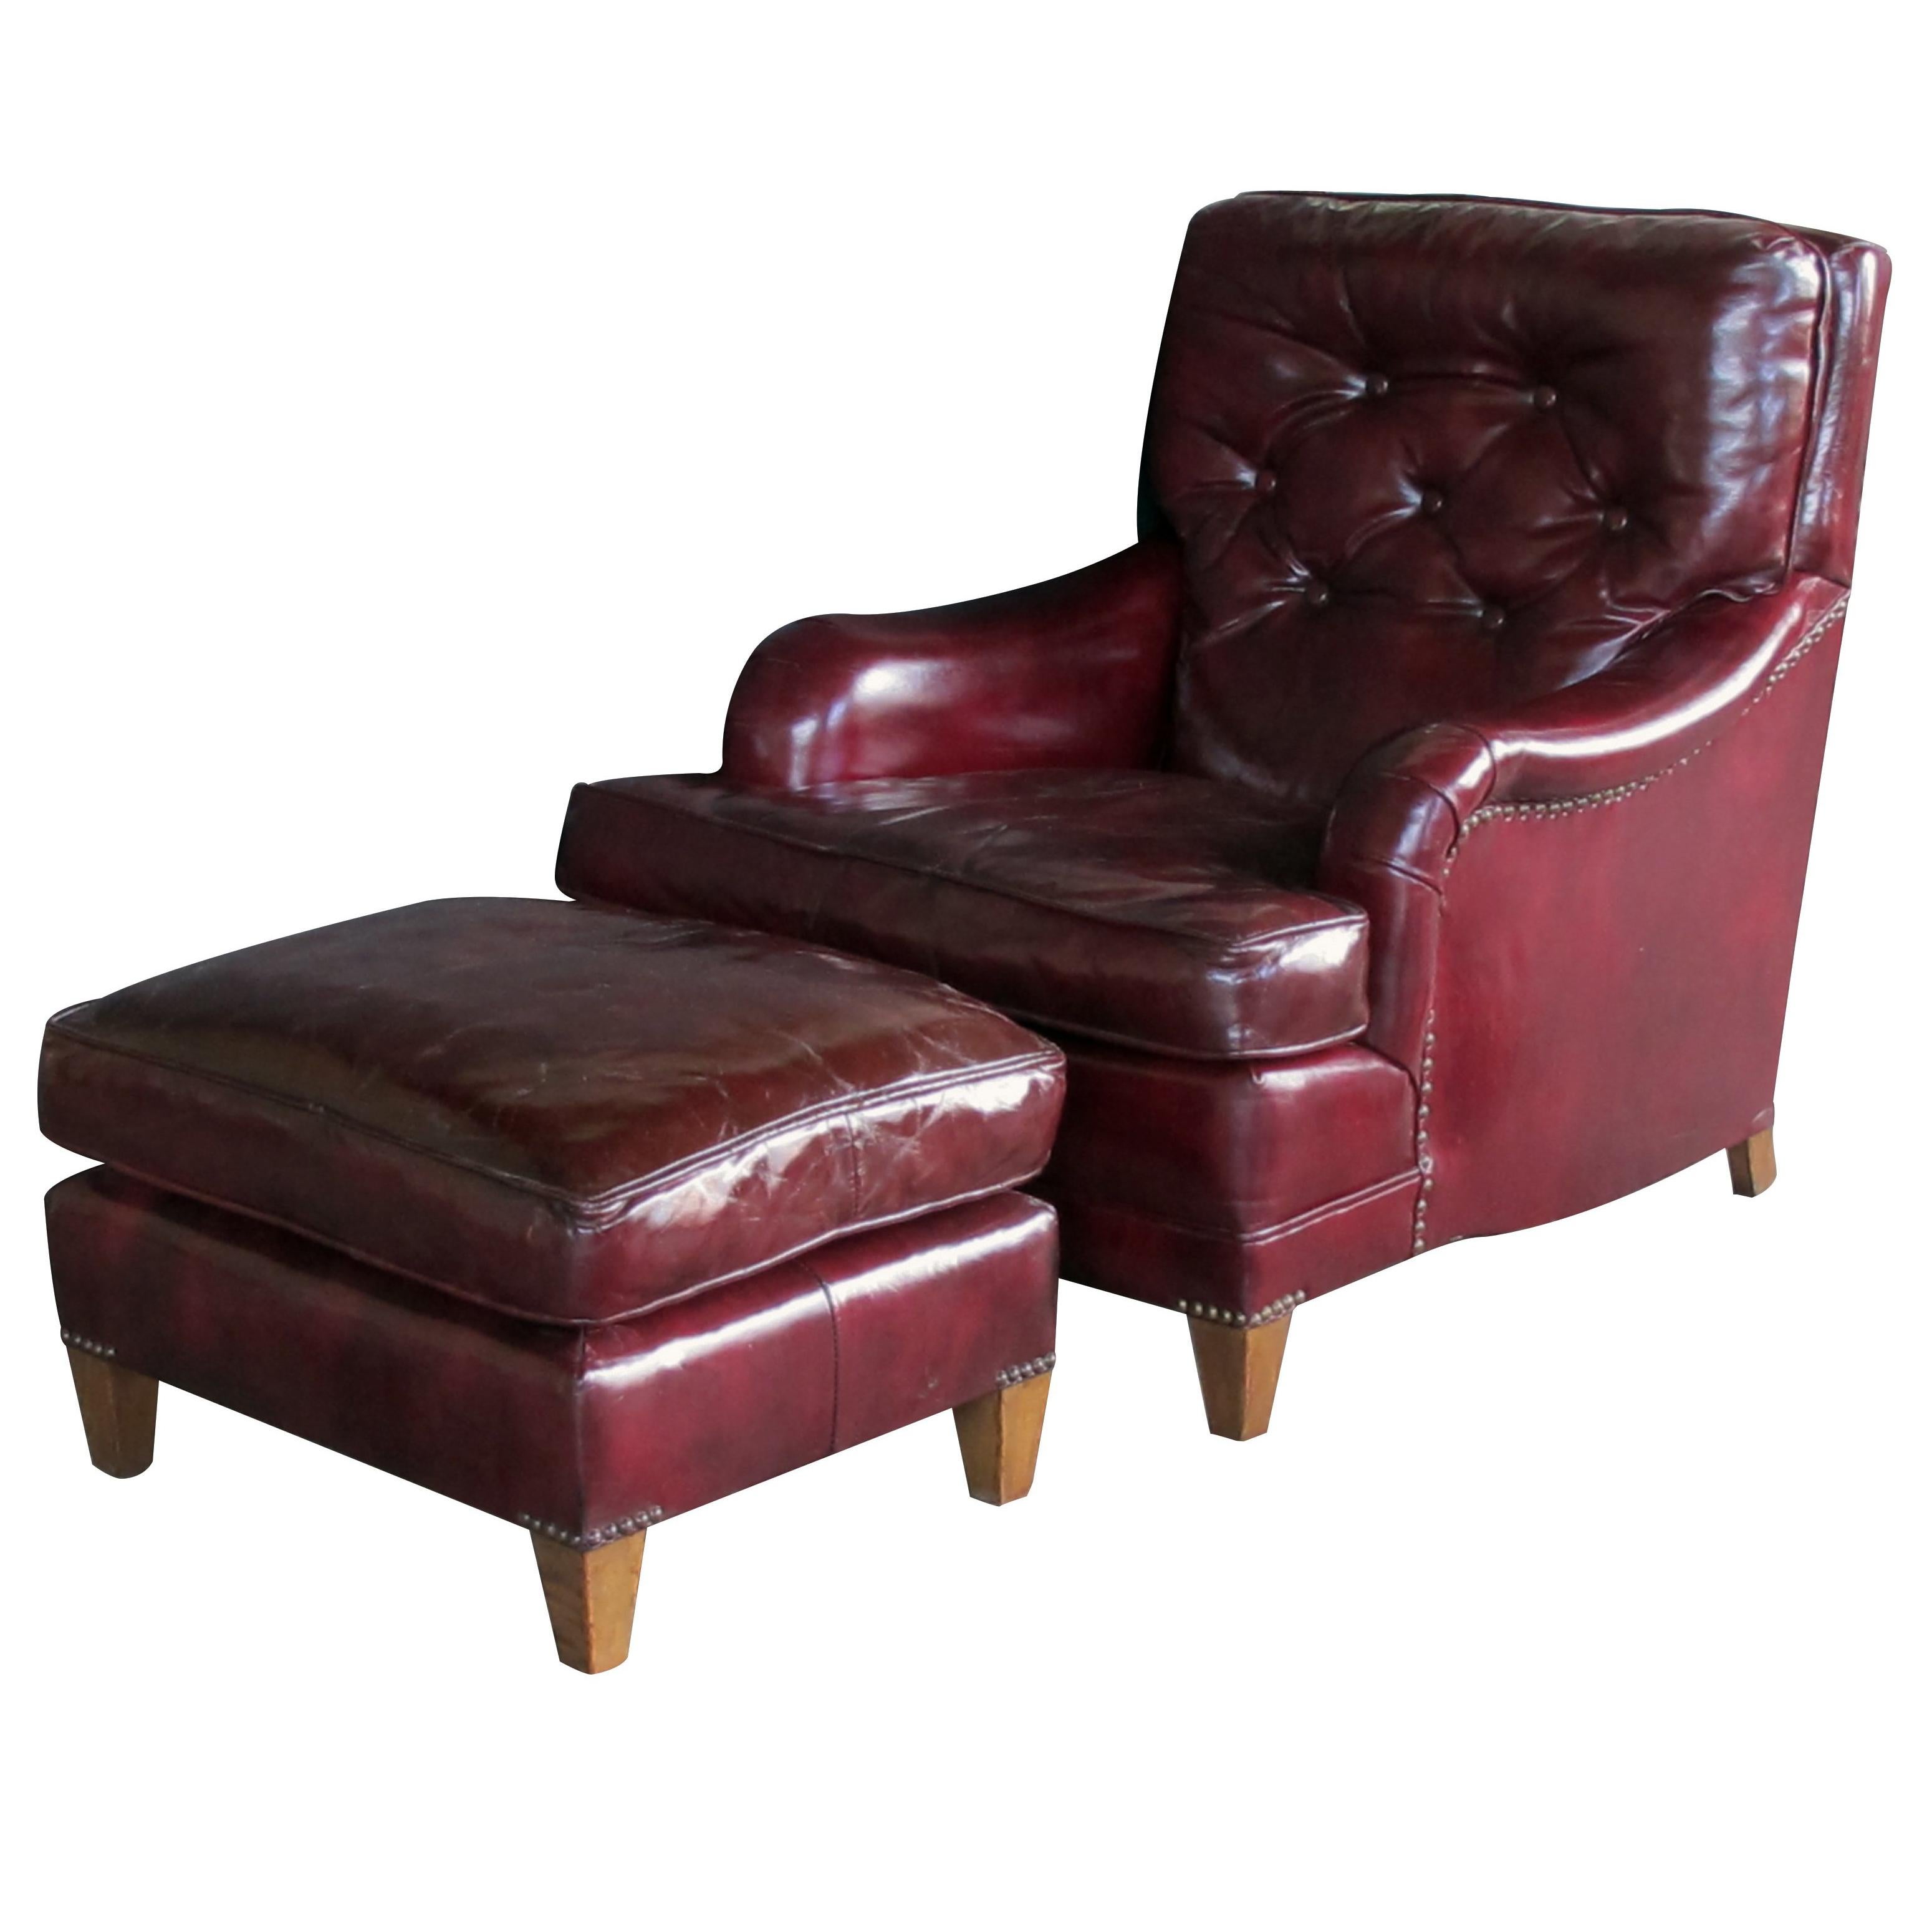 Handsome American Chesterfield Club Chair and Ottoman